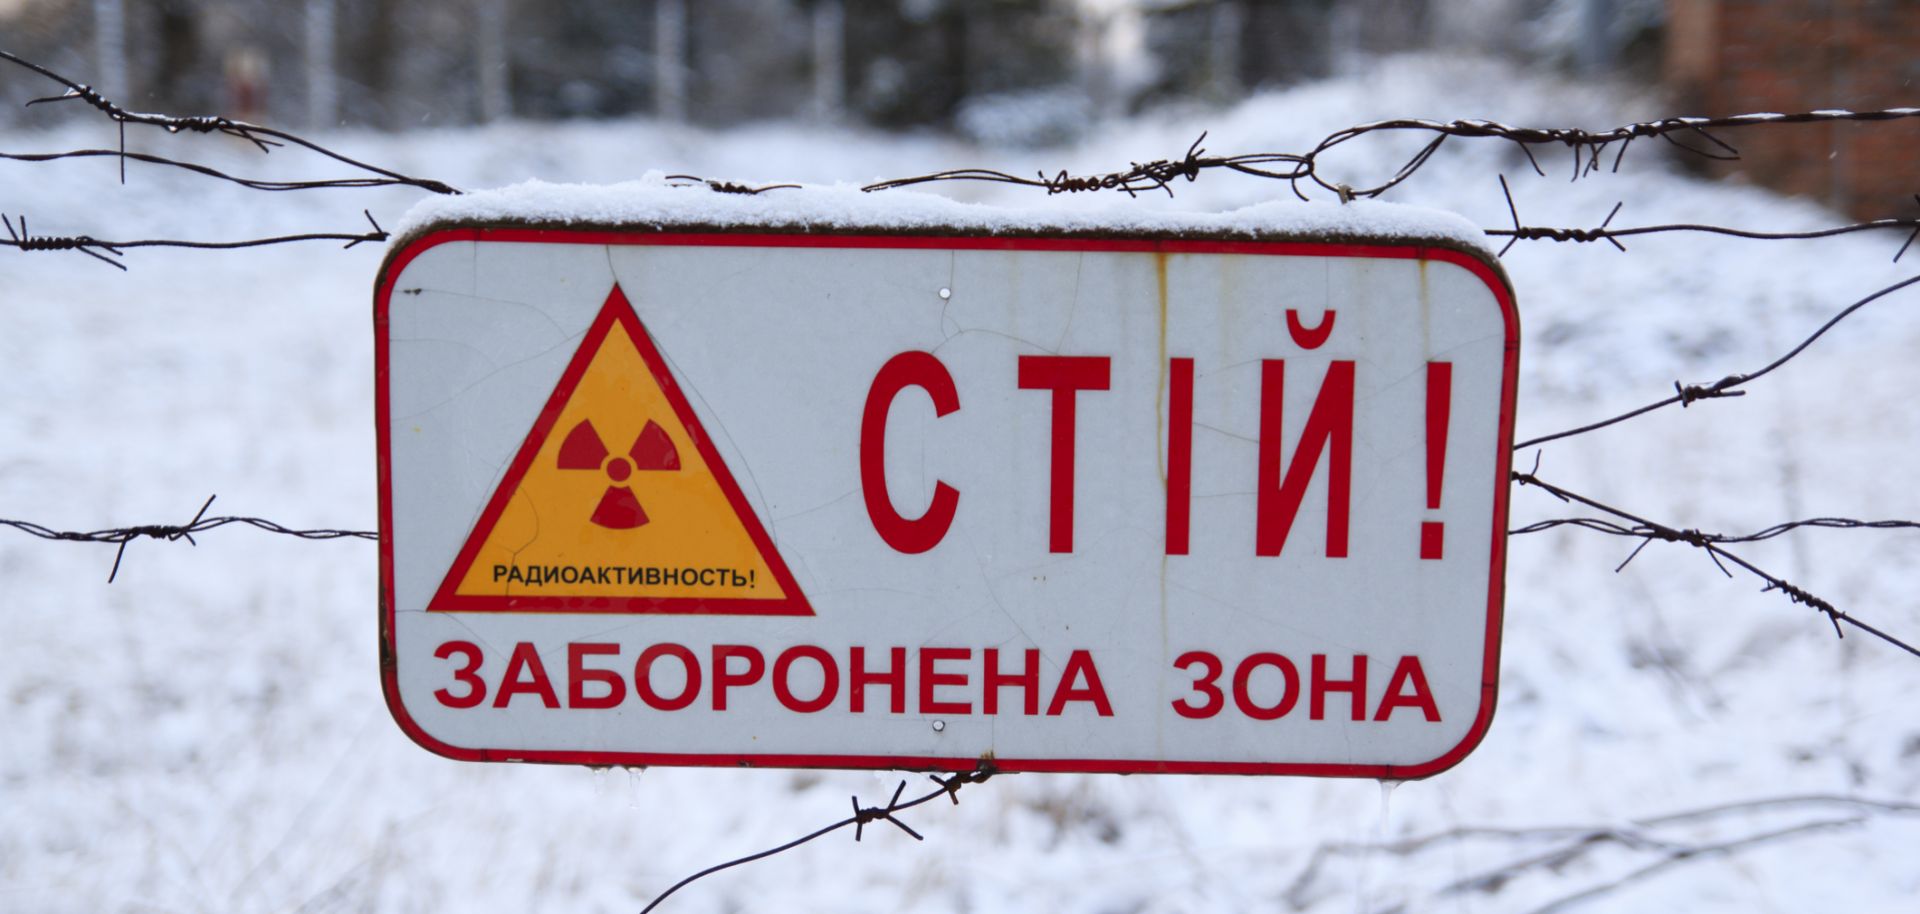 Despite the Chernobyl nuclear plant accident of 1986, Russia has become the dominant player in the nuclear power export game.